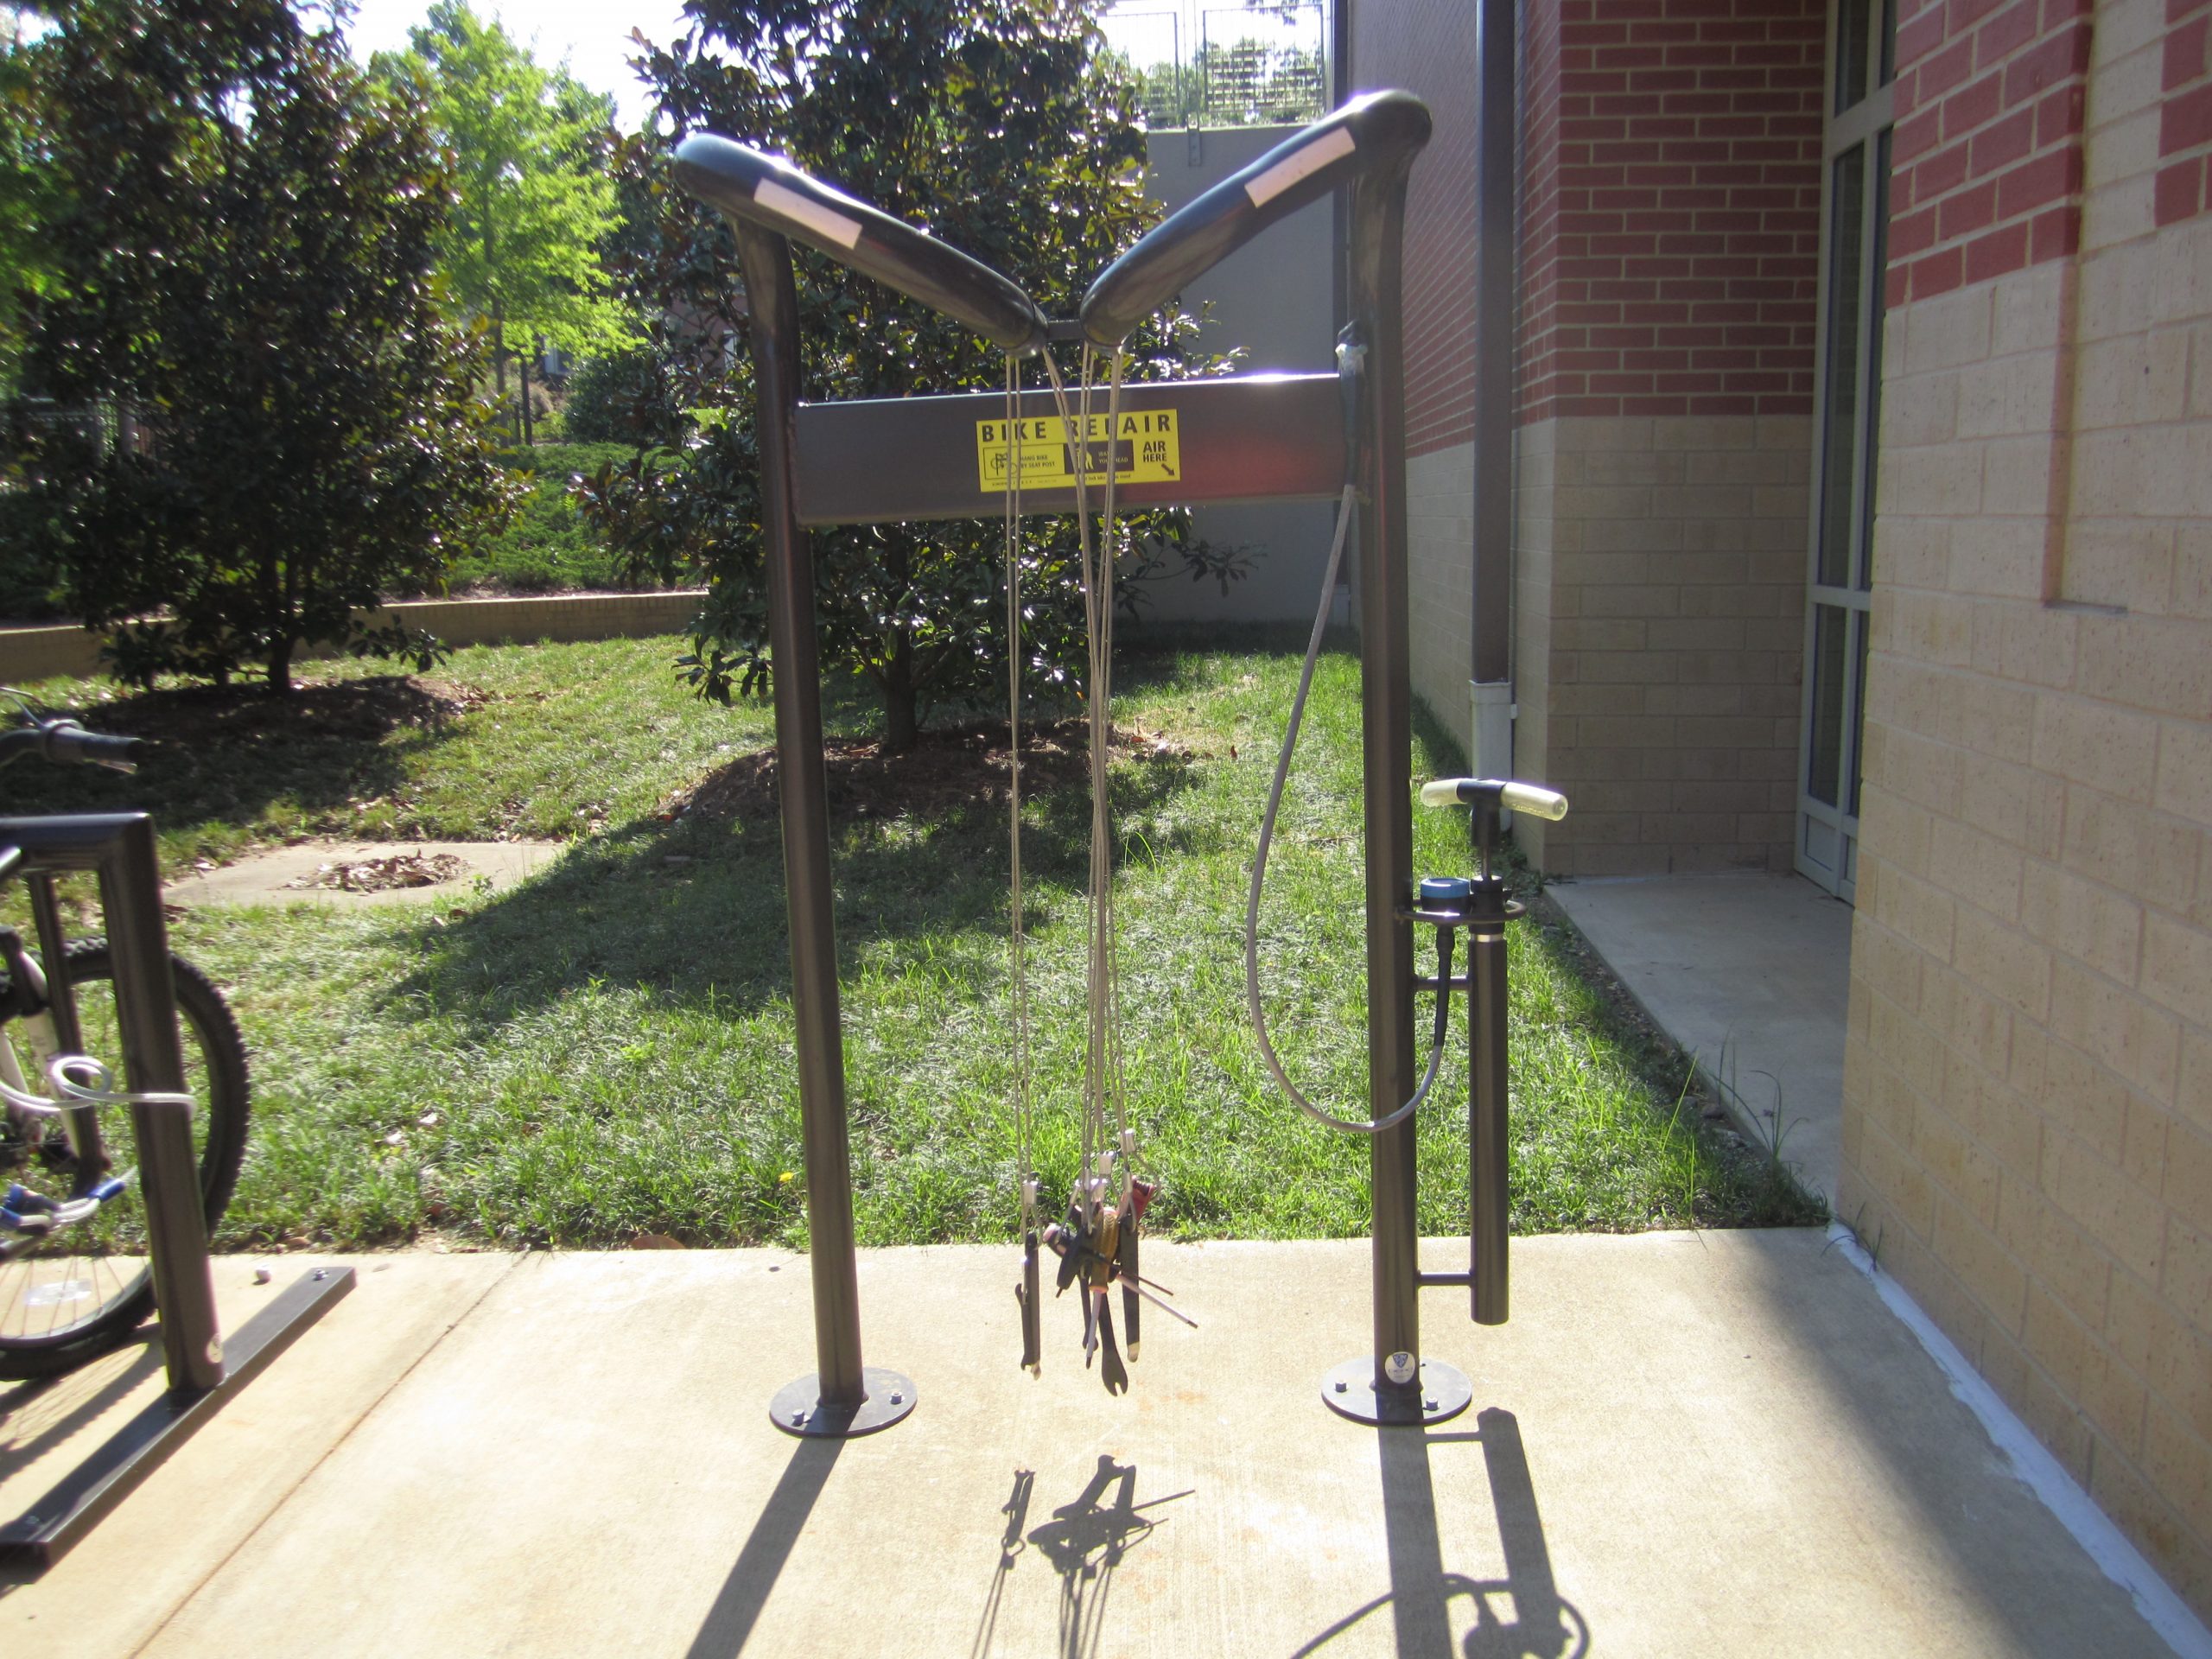 Photo of the Fix-It Repair station by the Melton Student Center.